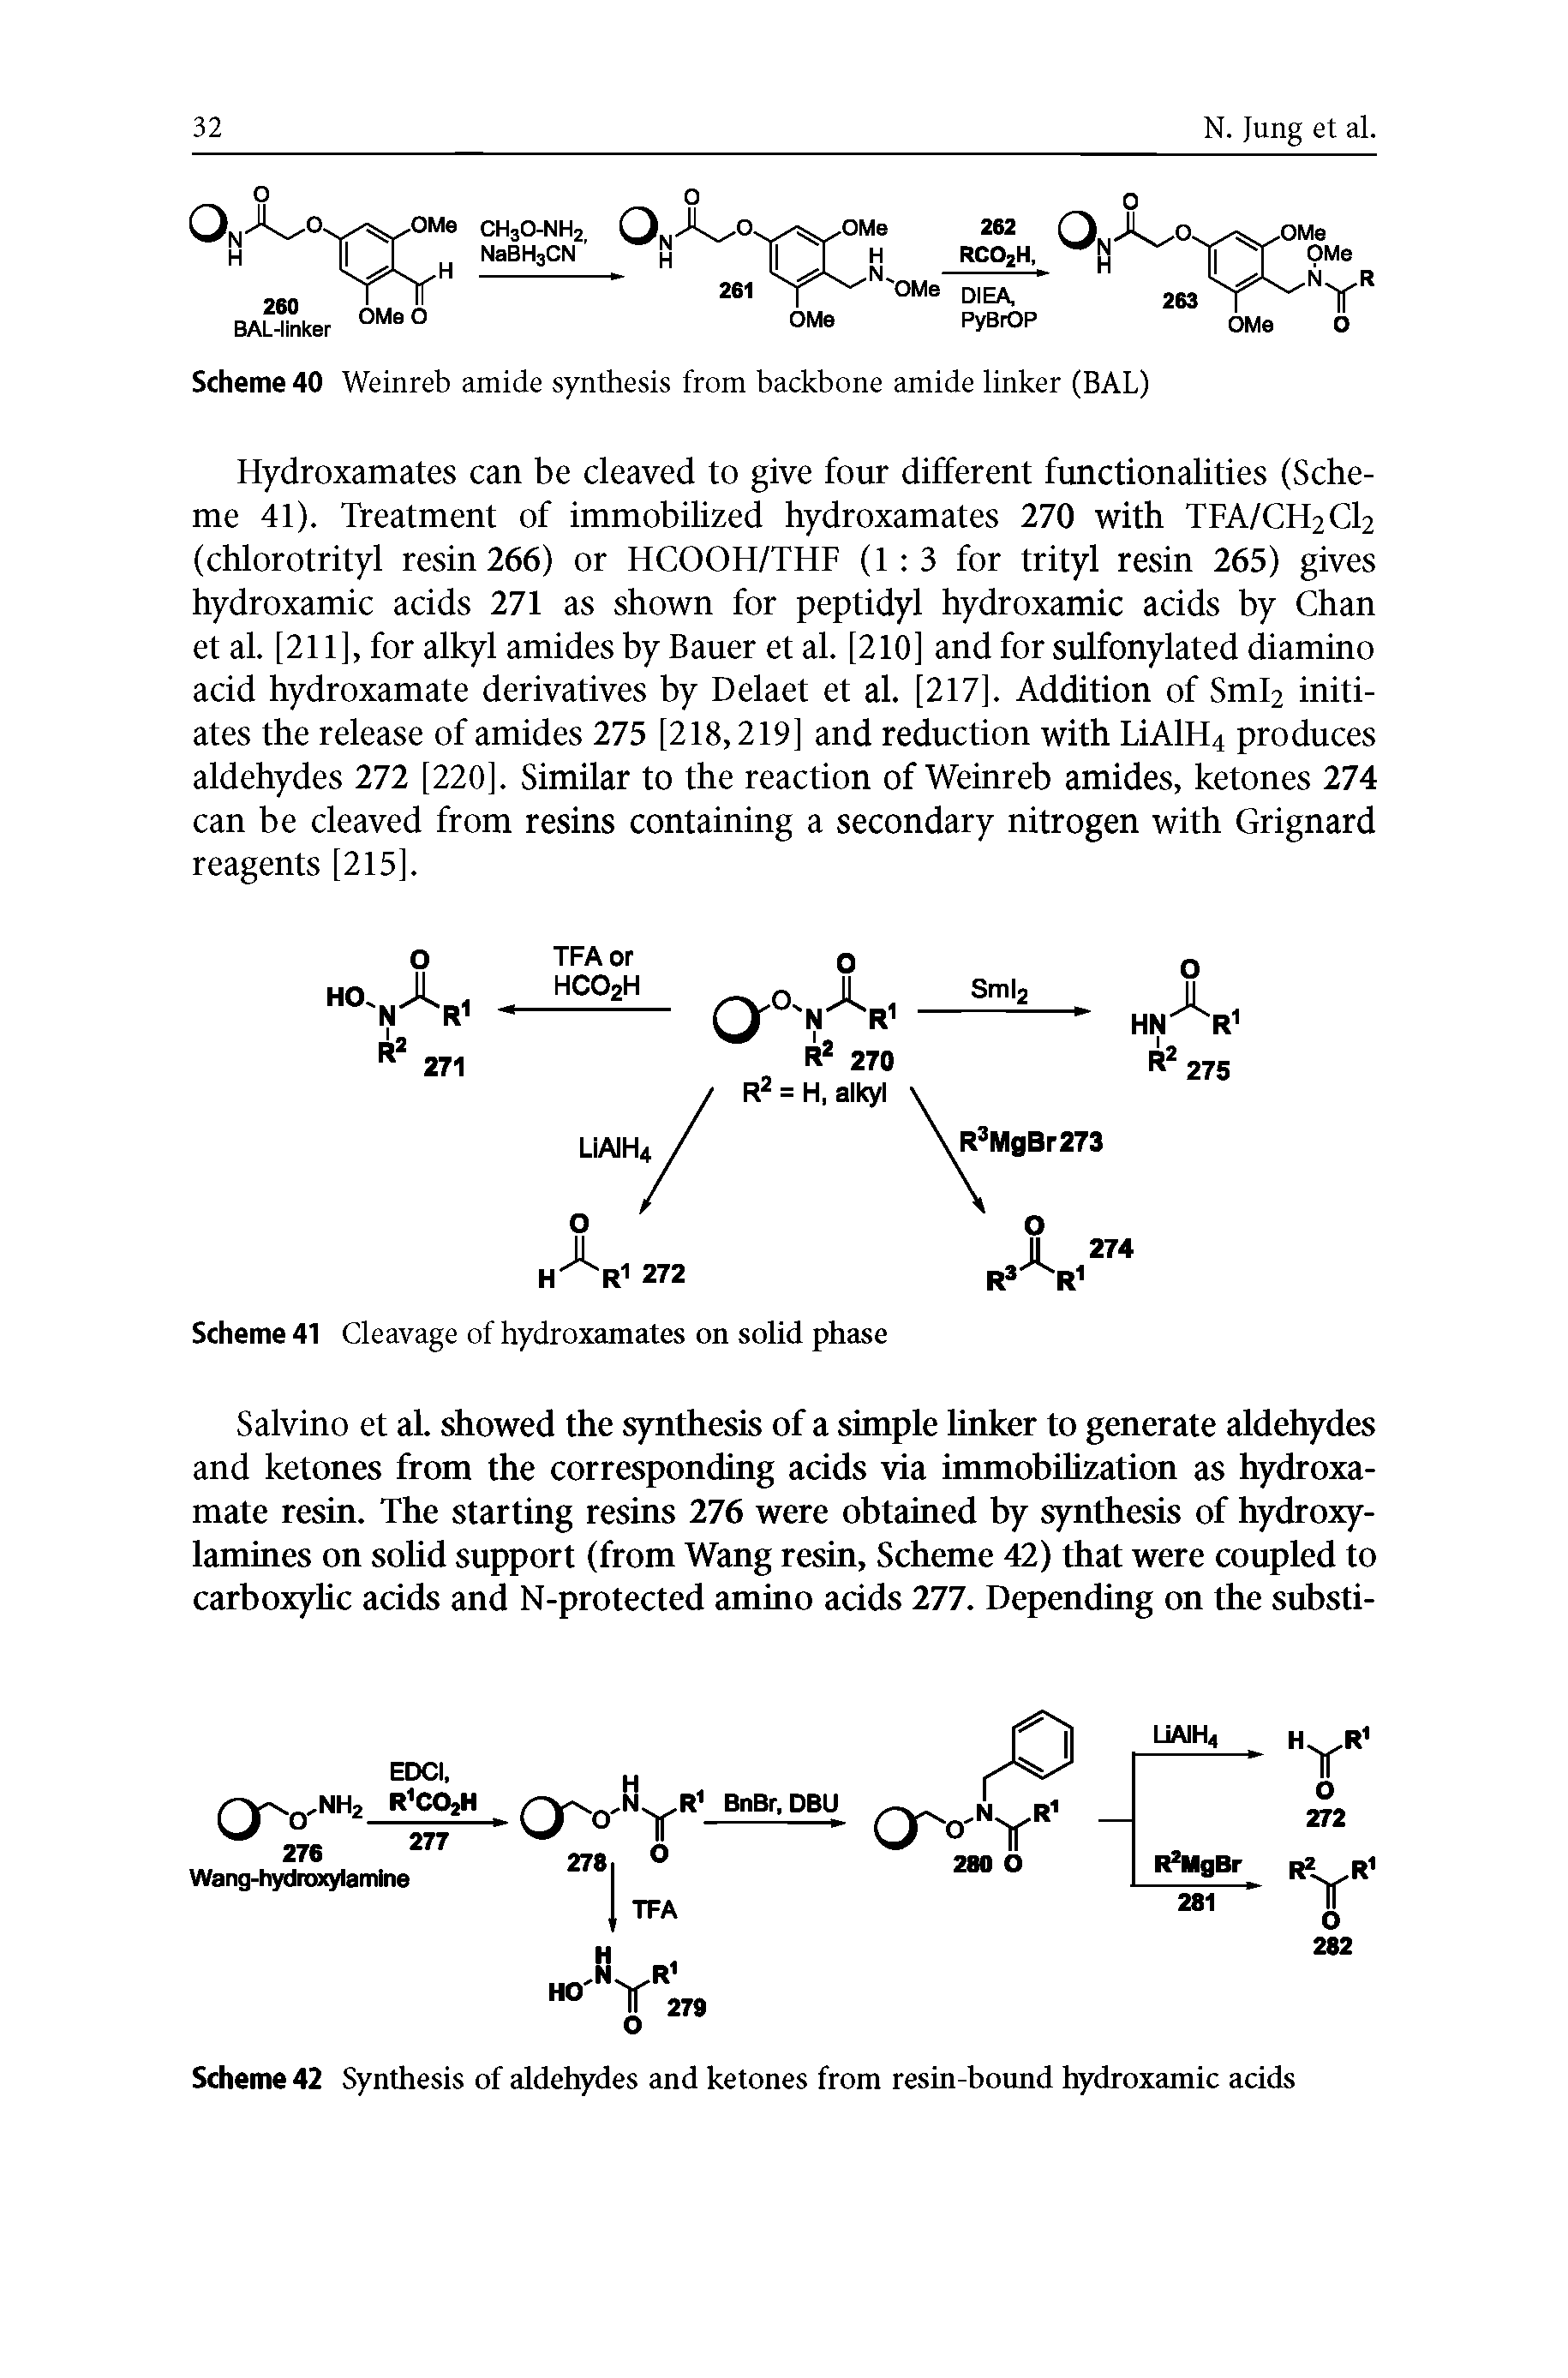 Scheme 42 Synthesis of aldehydes and ketones from resin-boimd hydroxamic acids...